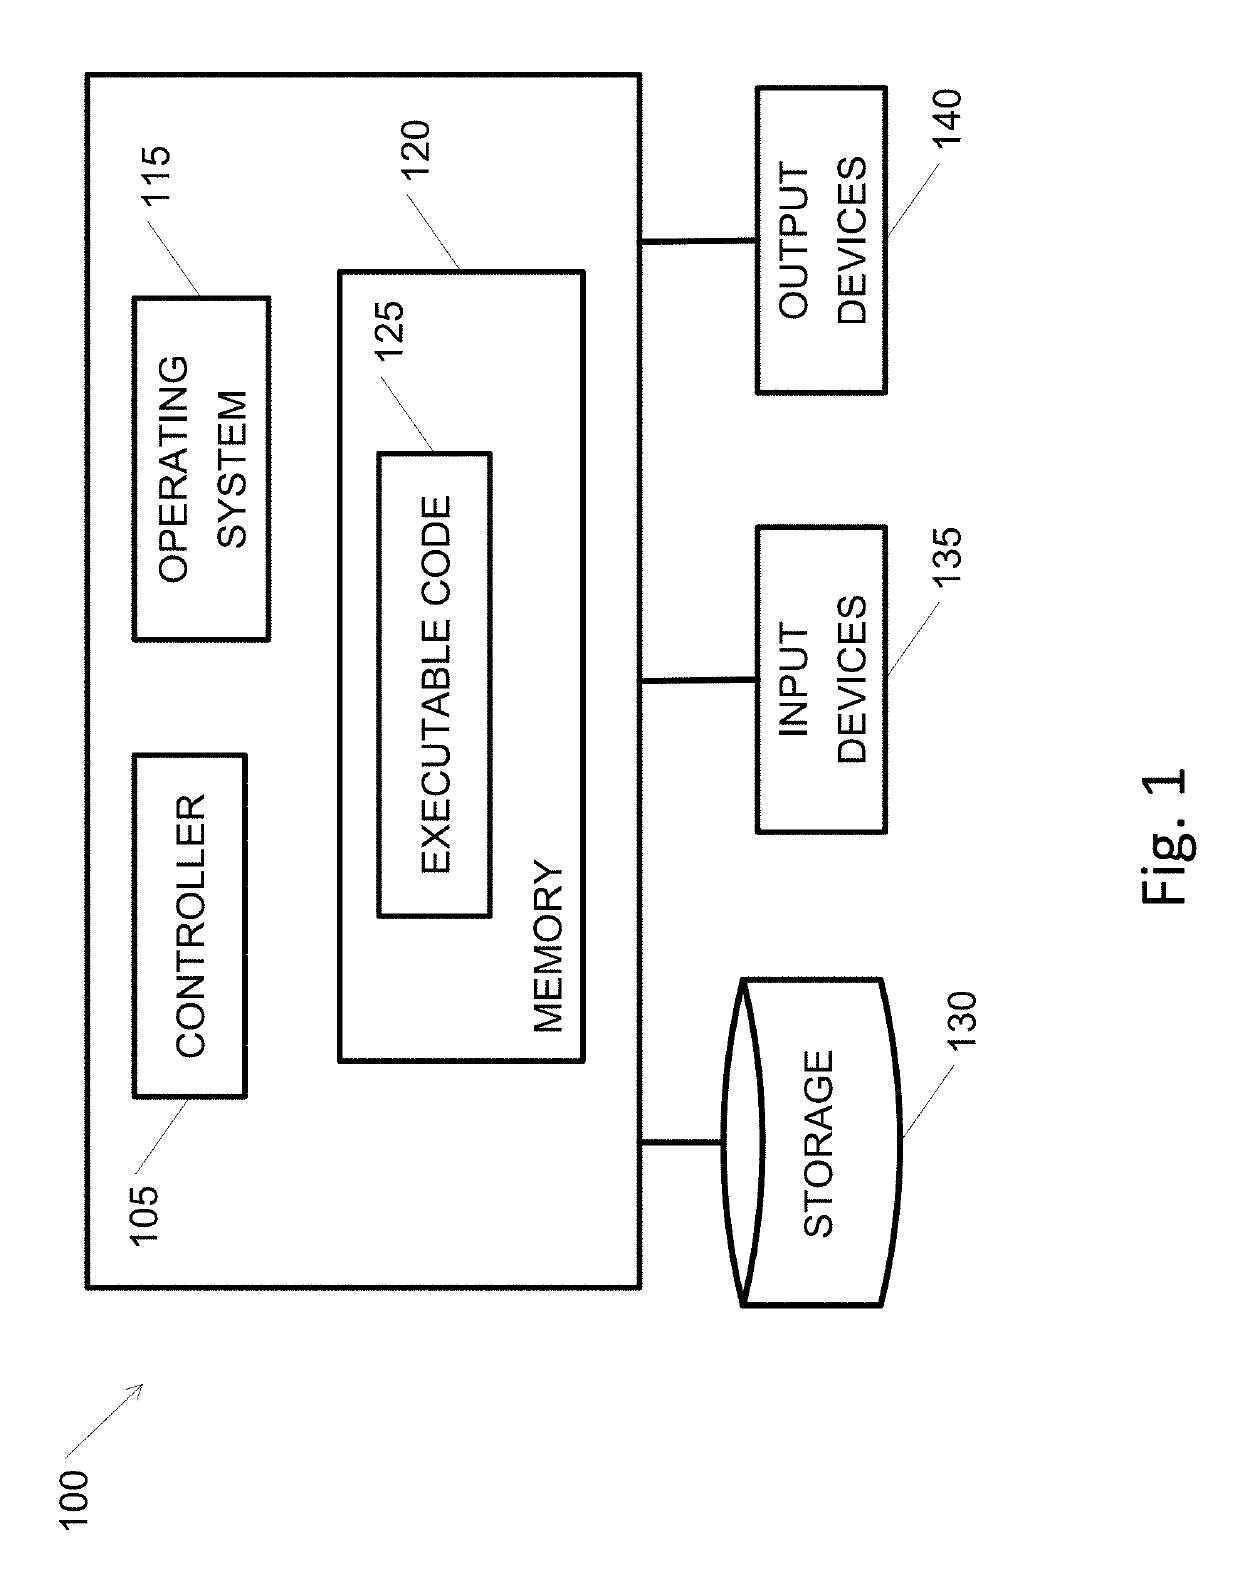 System and method for dynamically ordering video channels according to rank of abnormal detection